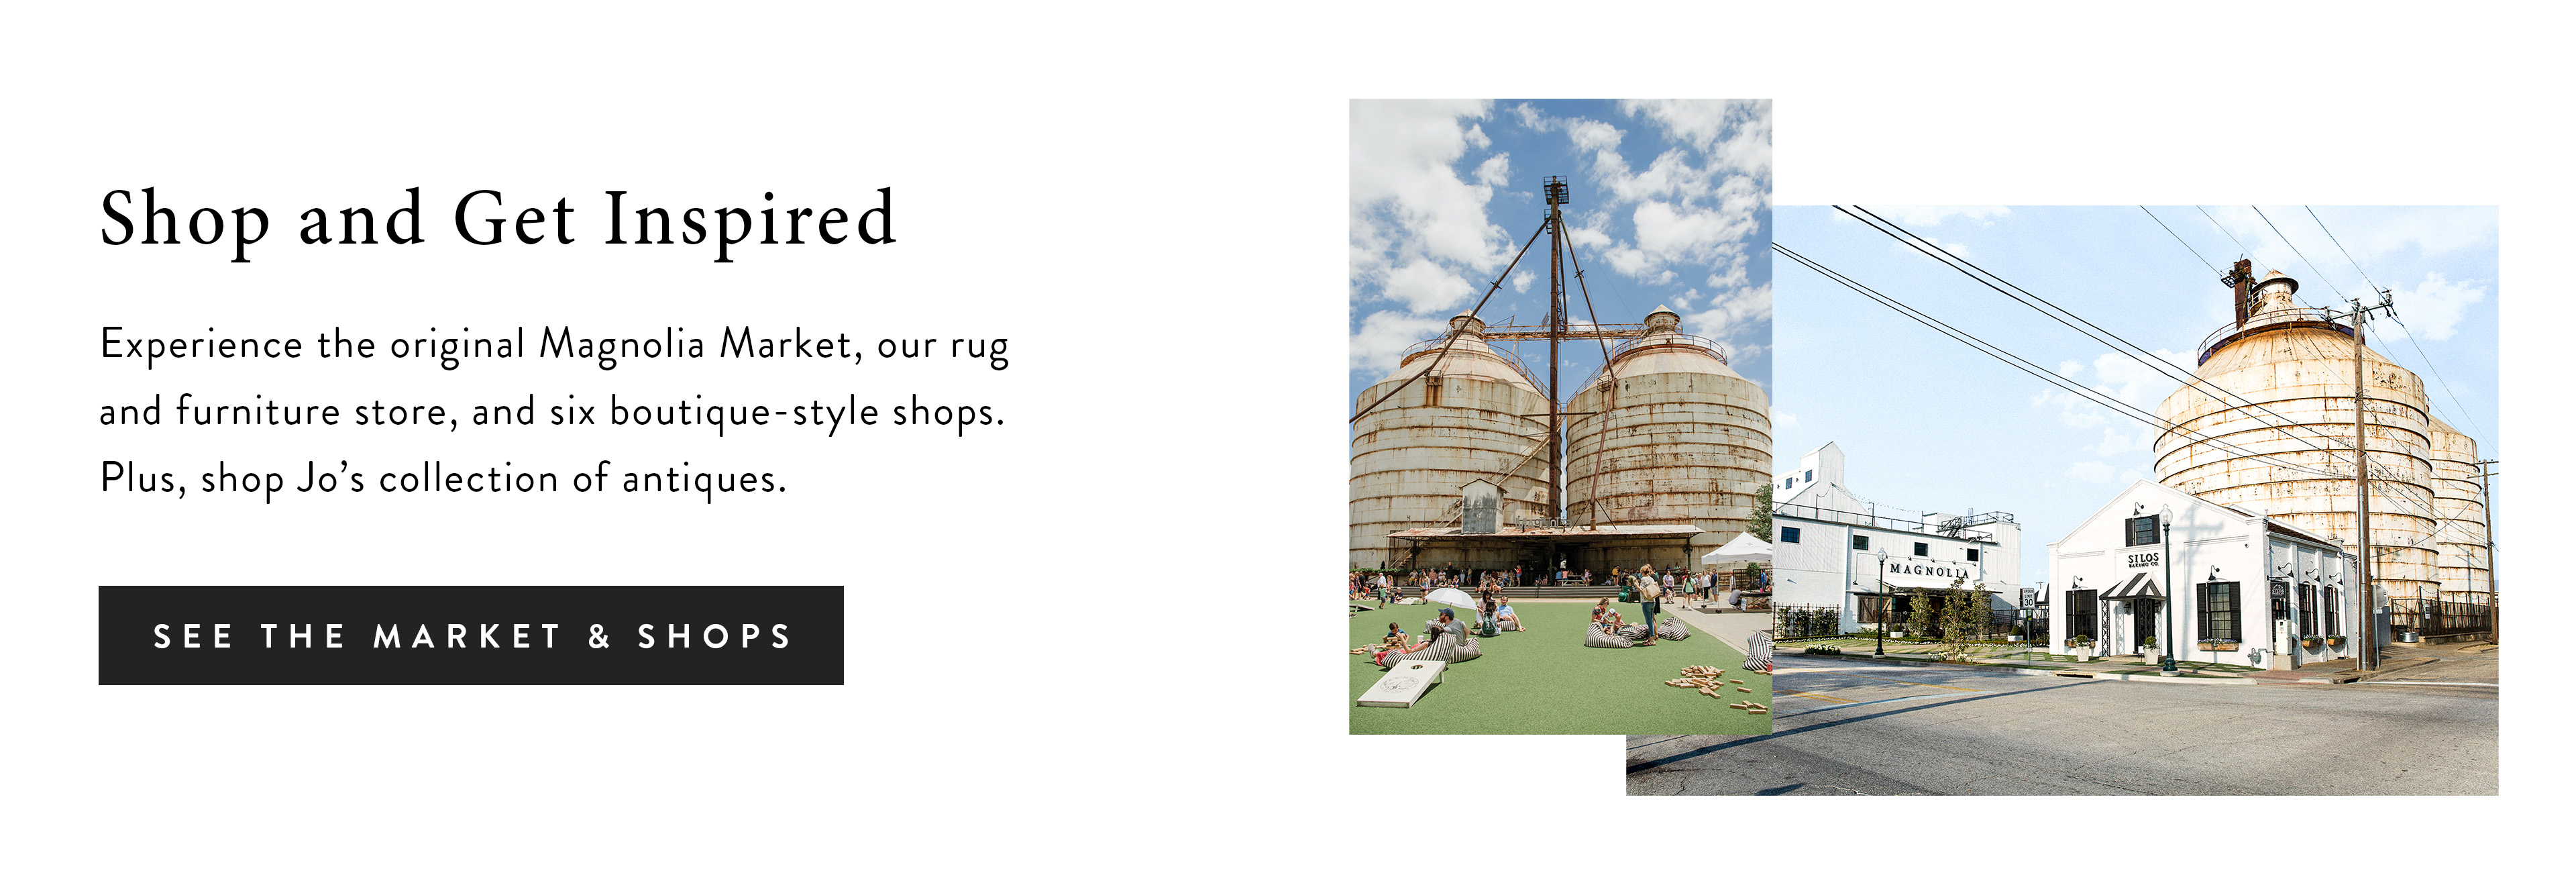 Experience the original Magnolia Market, our rug and furniture store, and six boutique-style shops. Plus, shop Jo's collection of antiques. See the market and shops. 